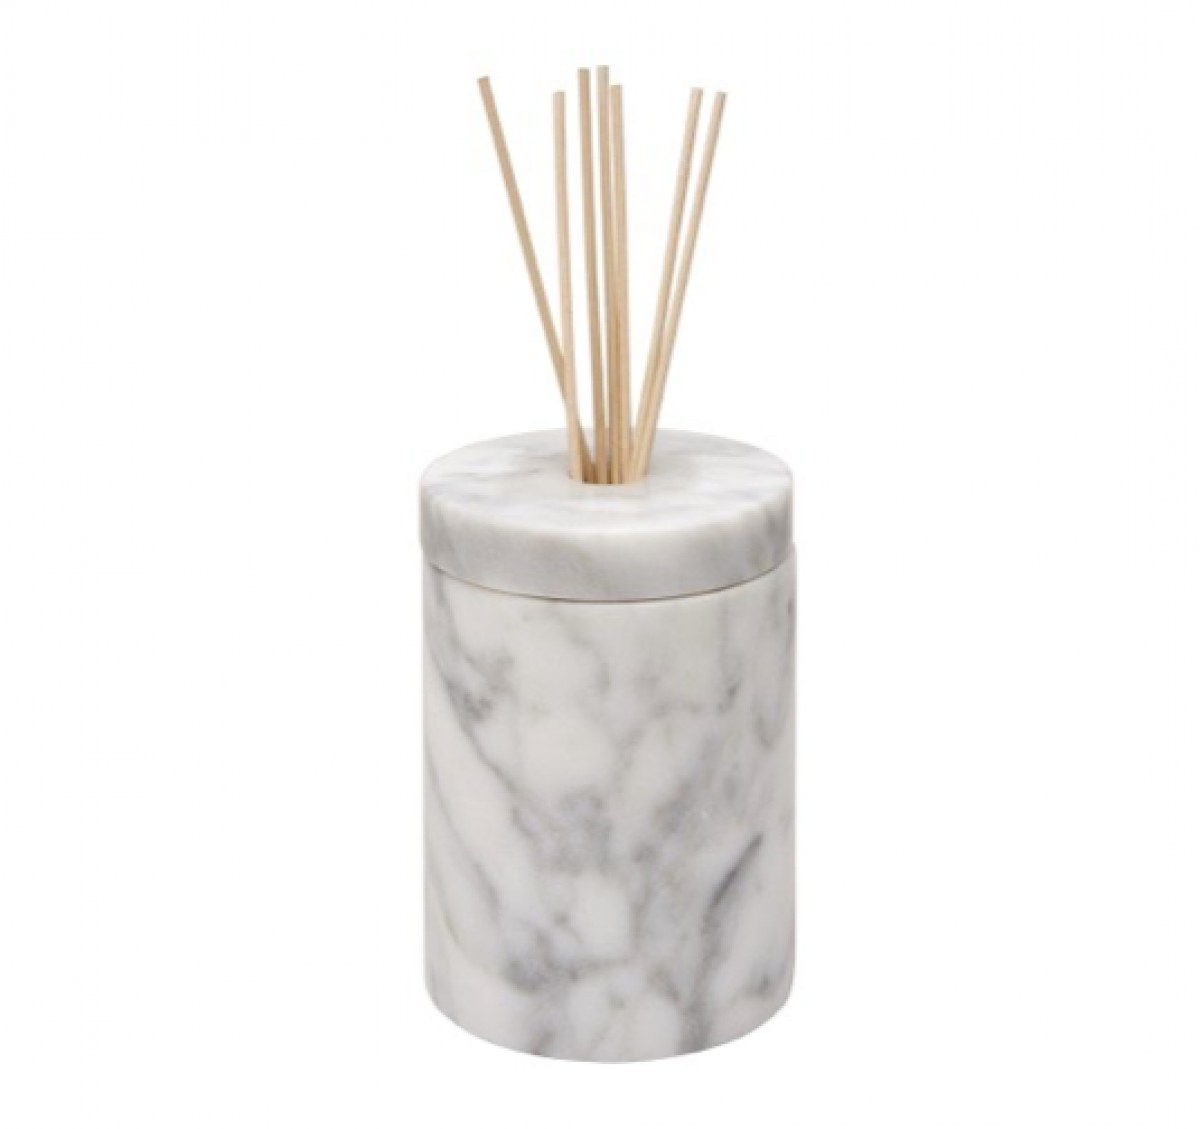 Waterworks Apothecary Diffuser Holder in Carrara | Highlight image